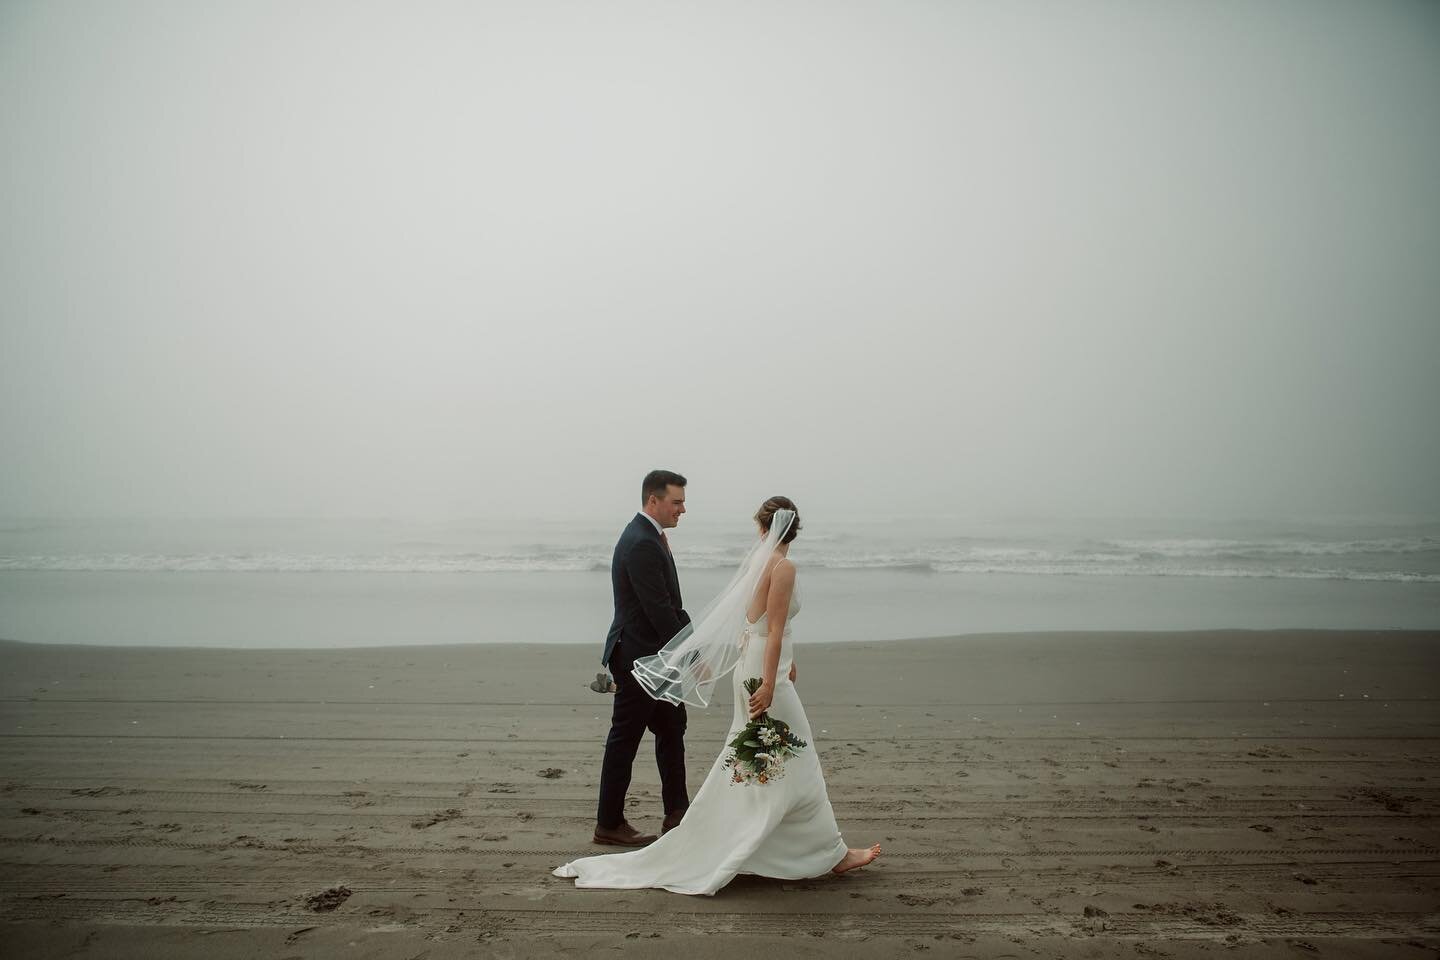 Can&rsquo;t ever get enough of looking back in these moments shared with Katie and TJ on this foggy oregon beach two years back. 
One of my biggest strengths is knowing when to give directions and when to just leave space for people to enjoy a moment